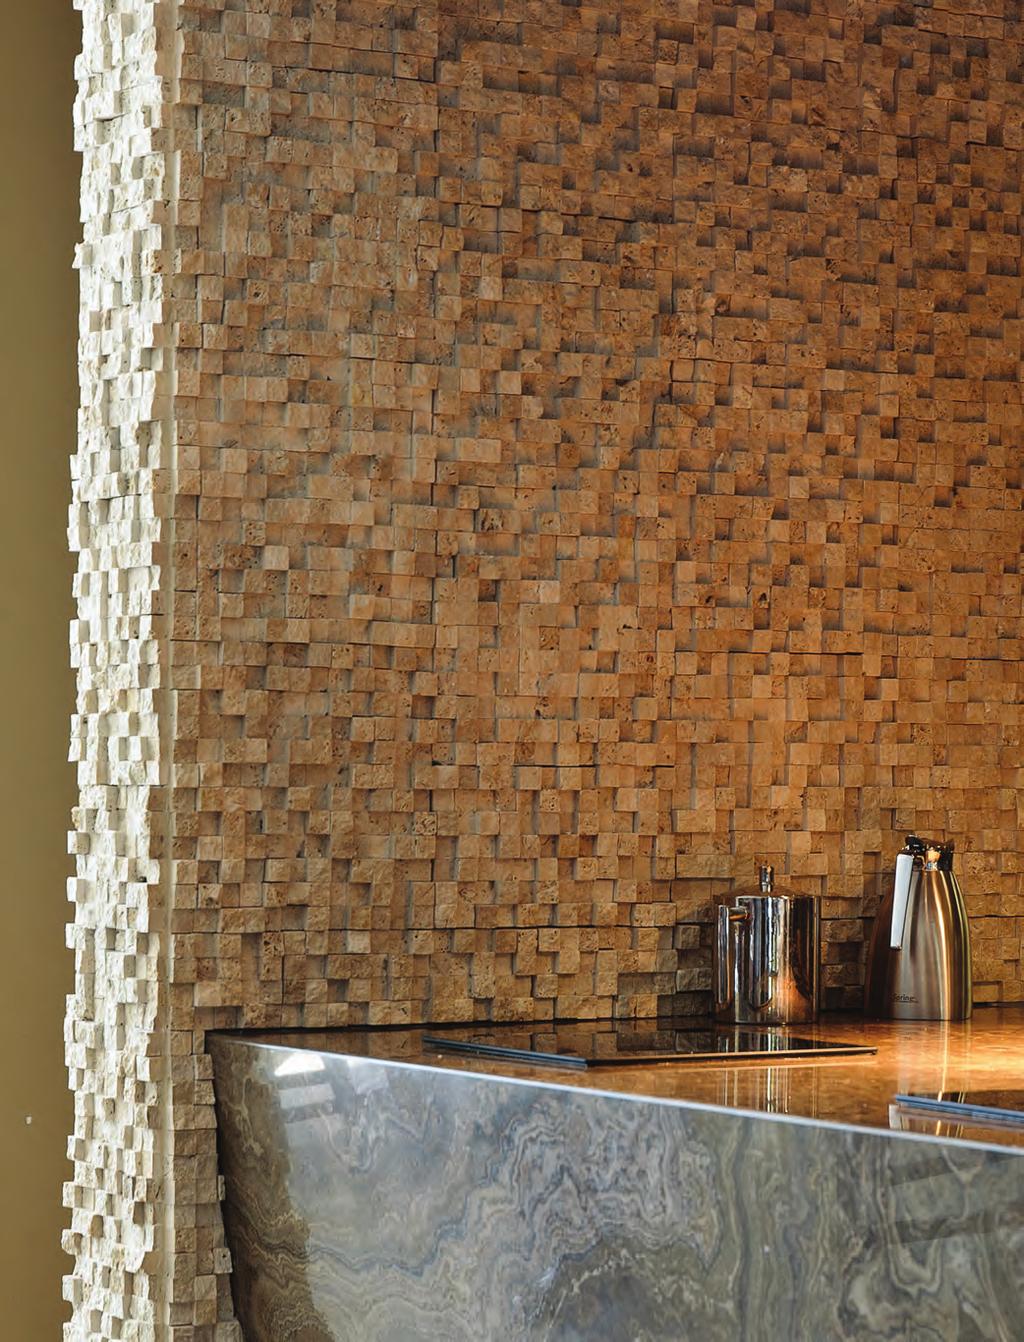 CLEARANCE MOSAICS Product Featured: Ivory Rock